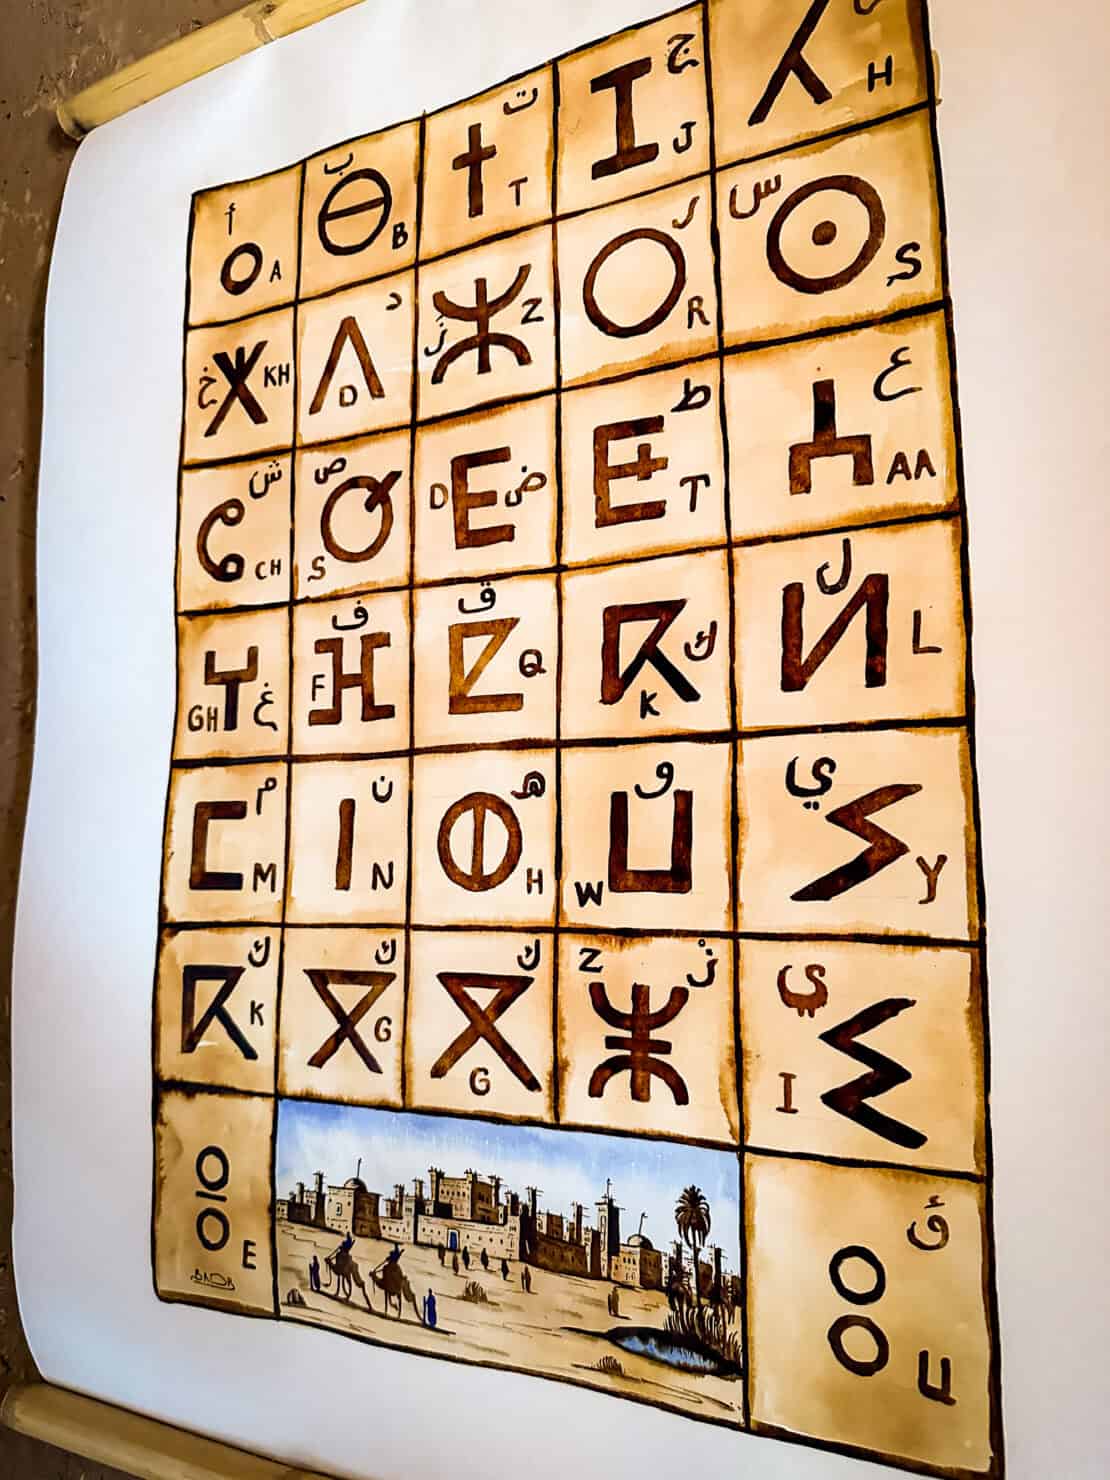 Berber alphabet poster encountered on a Morocco itinerary